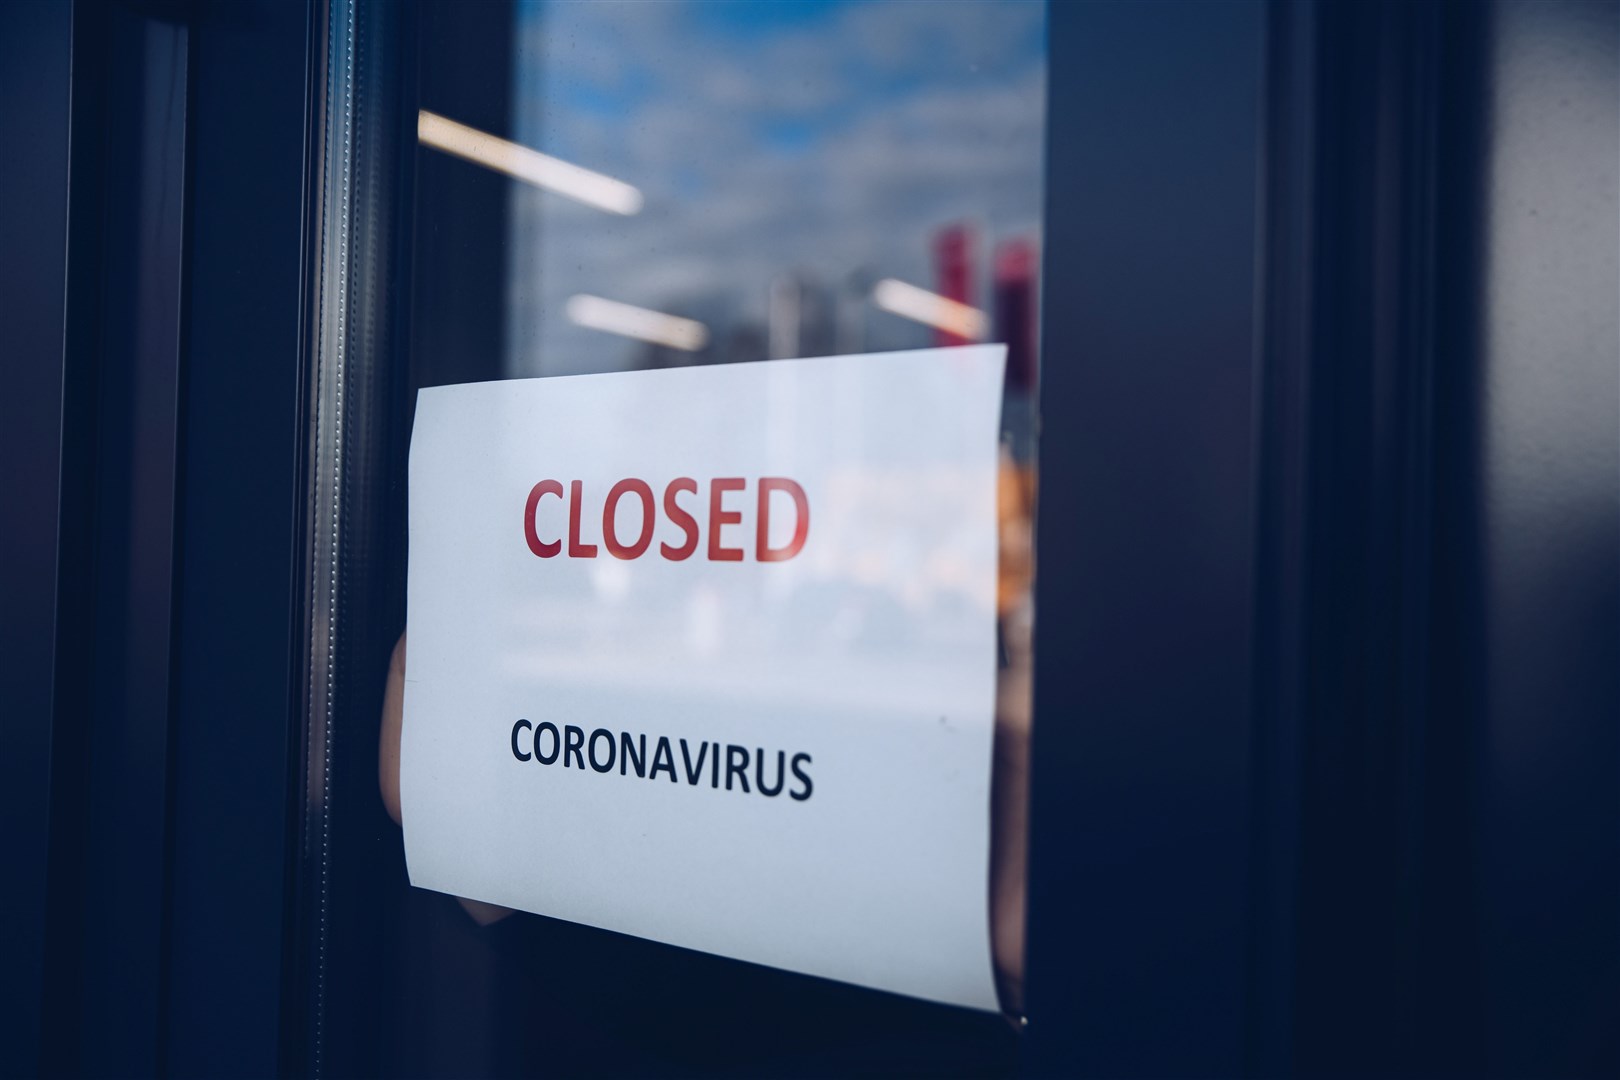 Many policyholders were refused claims for business interruption when they were forced to close due to coronavirus.